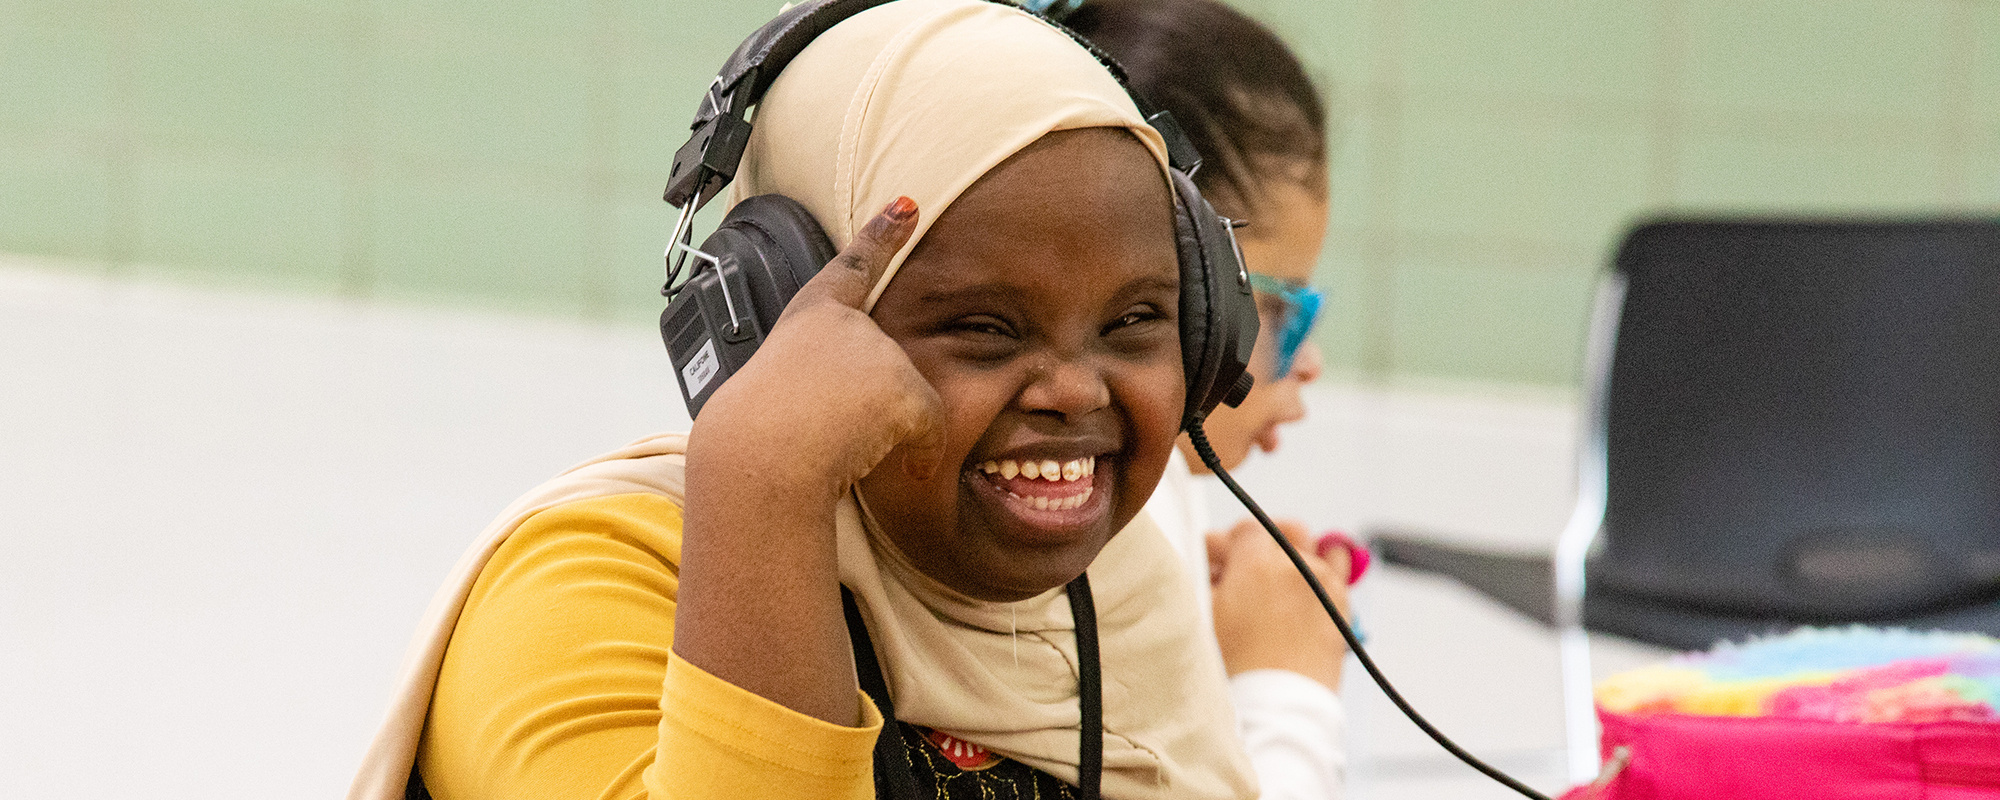 Young woman with a big smile wearing headphones